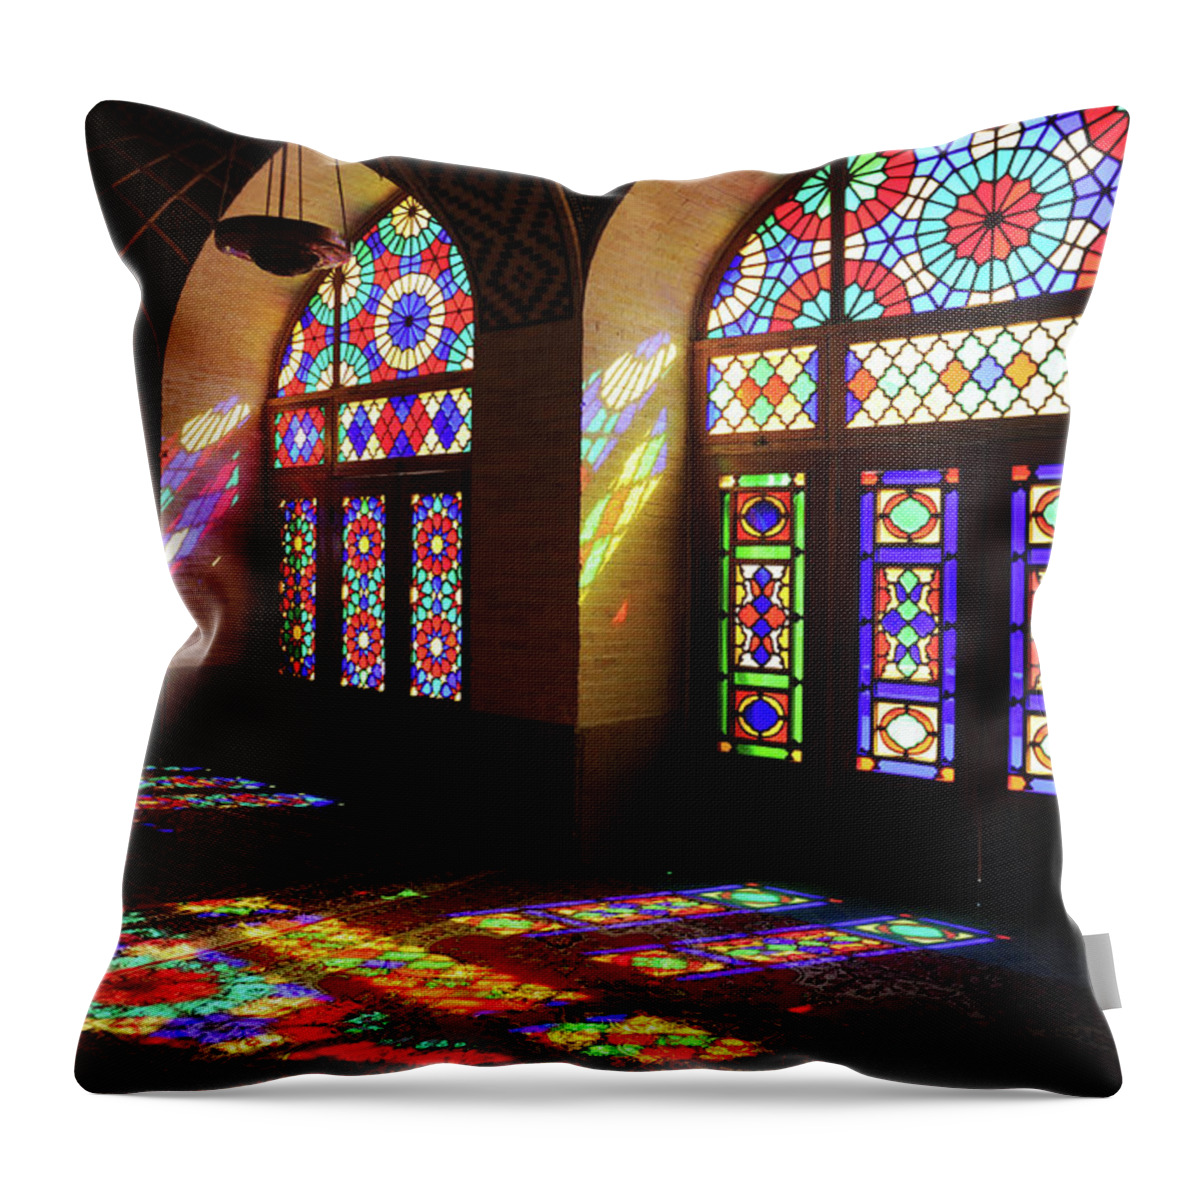 Architectural Feature Throw Pillow featuring the photograph Nasir Al-mulk Mosque by Kickimages